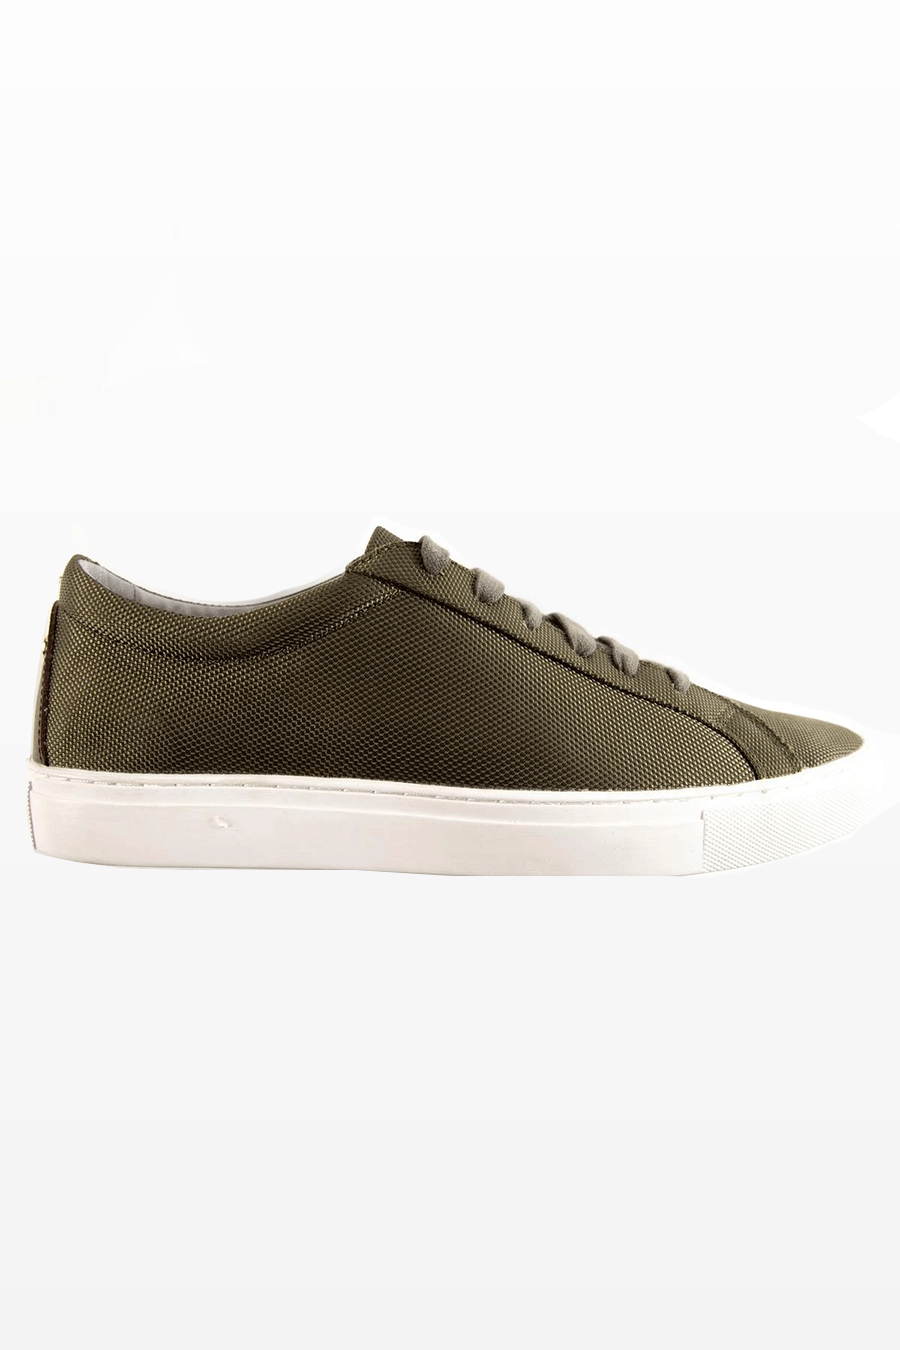 Kennedy Sneaker | Evergreen - Main Image Number 2 of 2